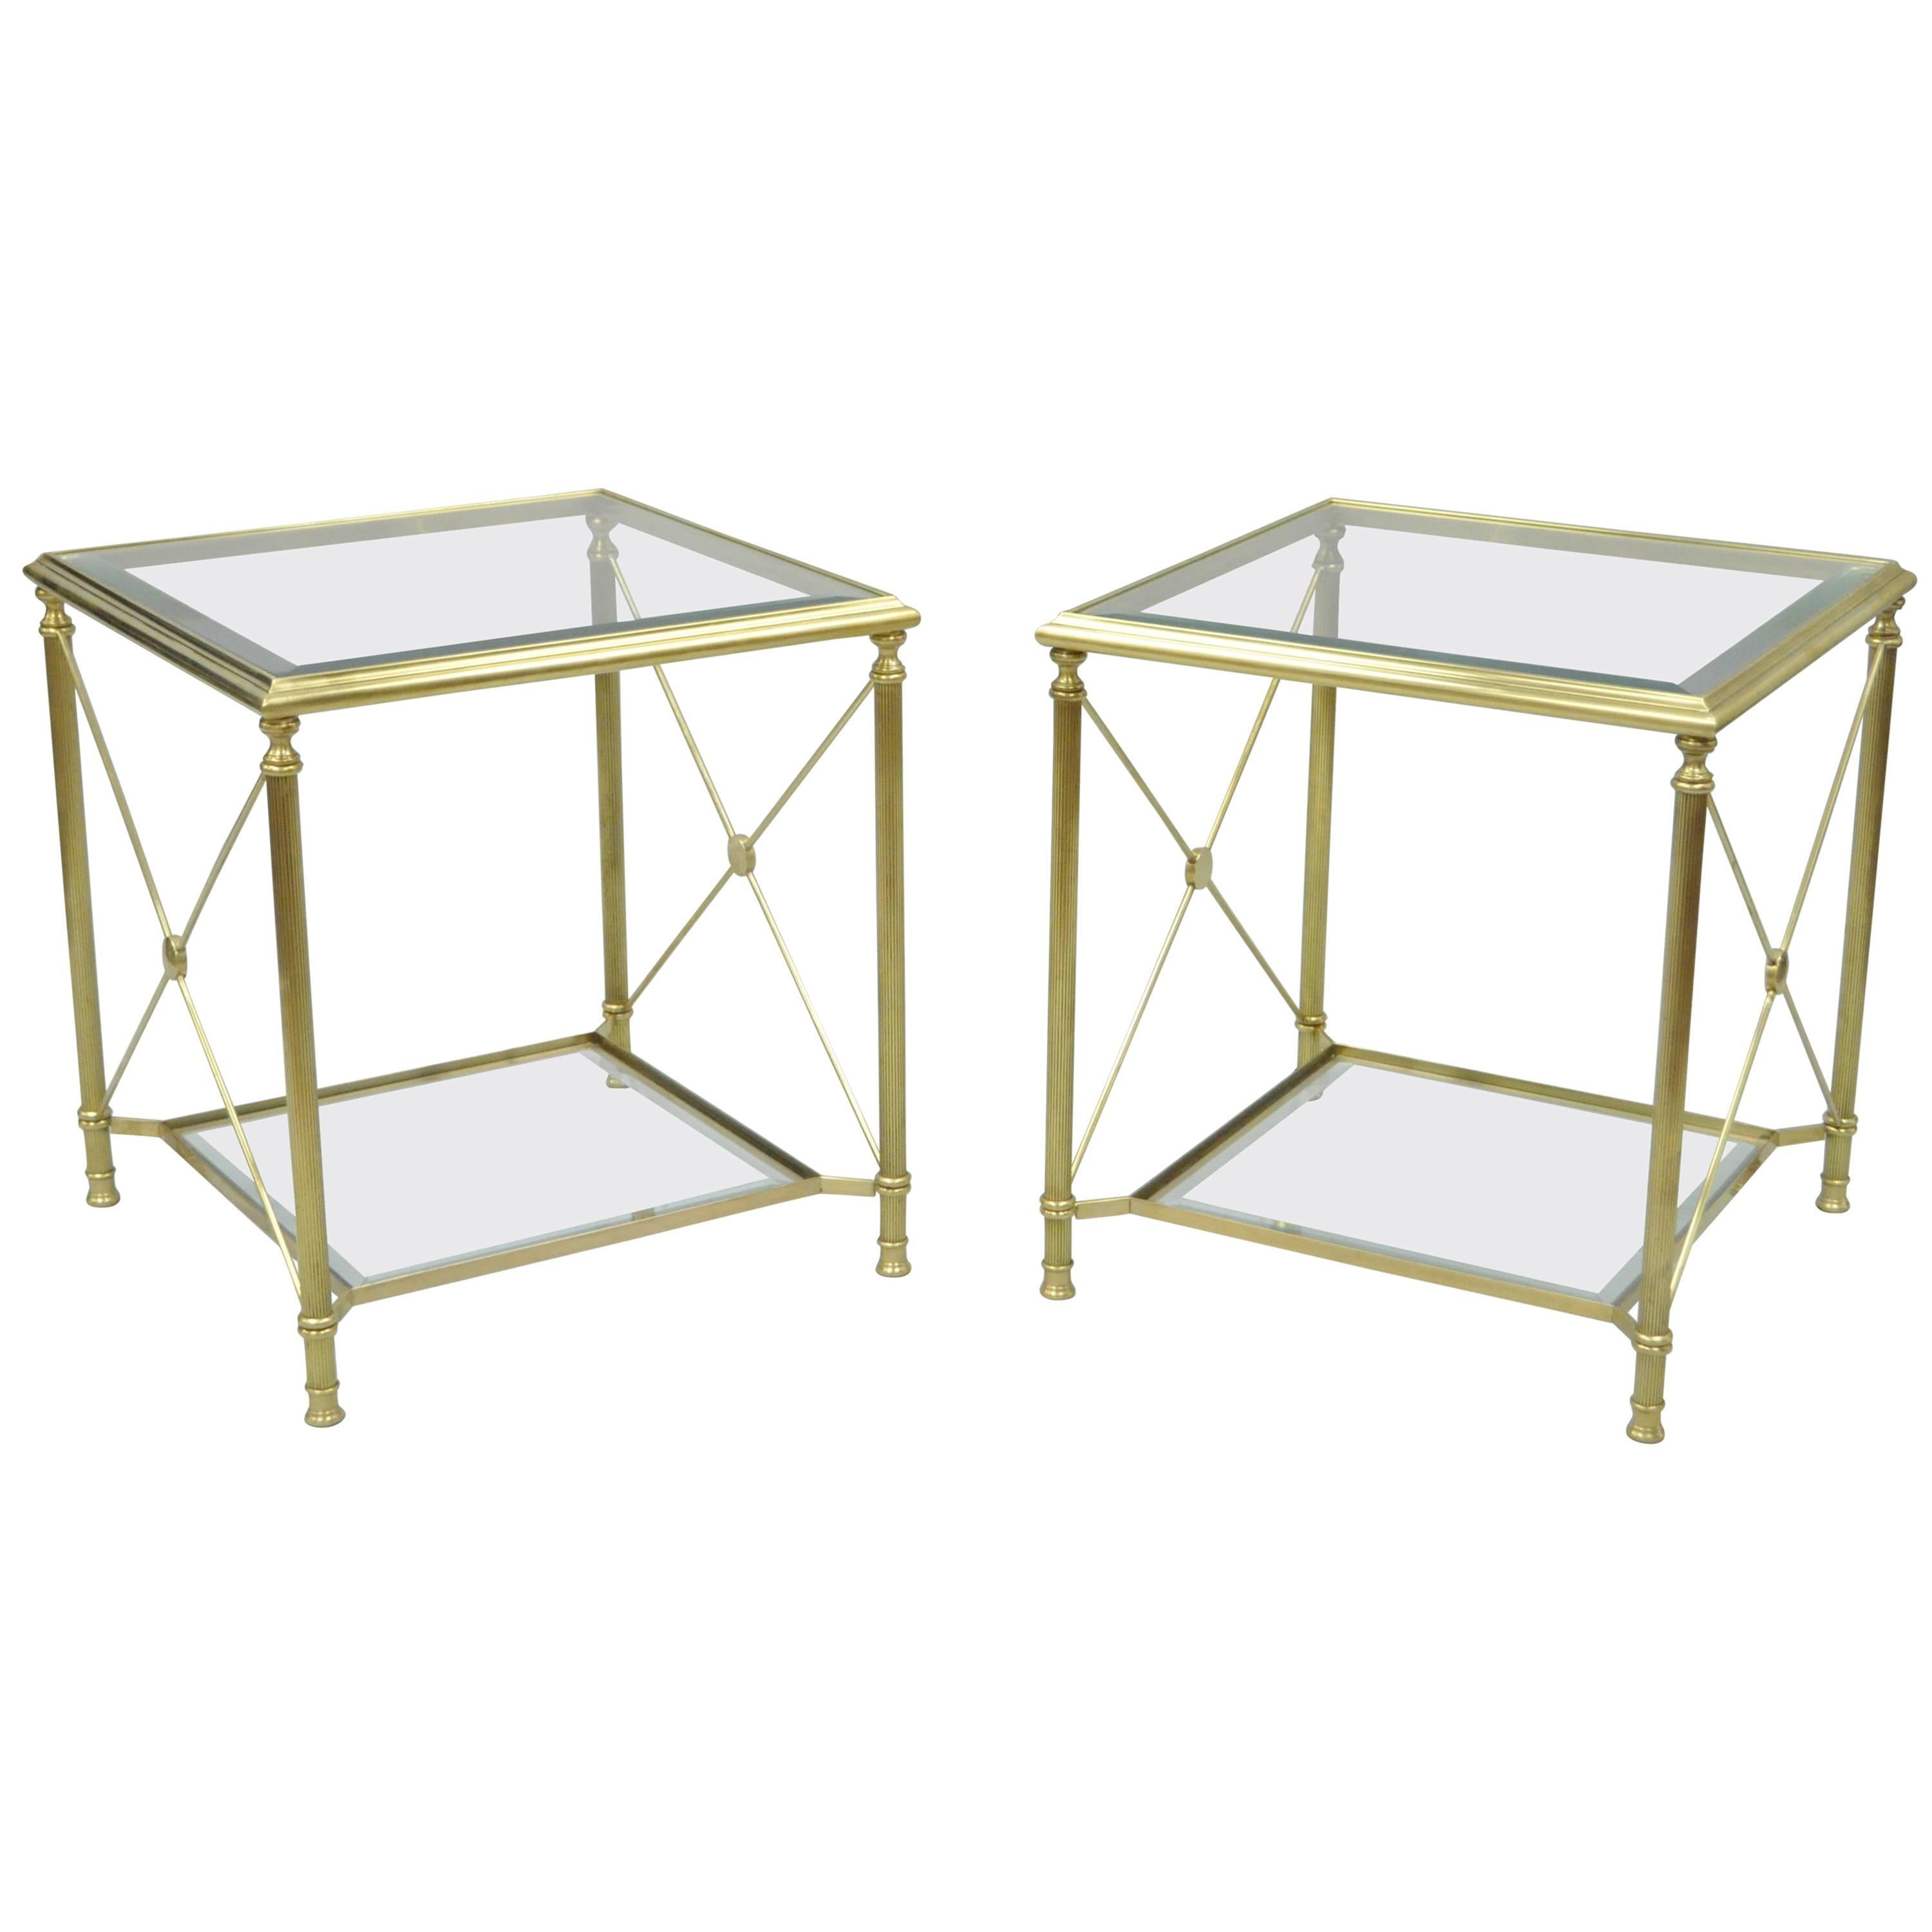 Pair of Brass and Glass Neoclassical Directoire Style X-Form Square End Tables